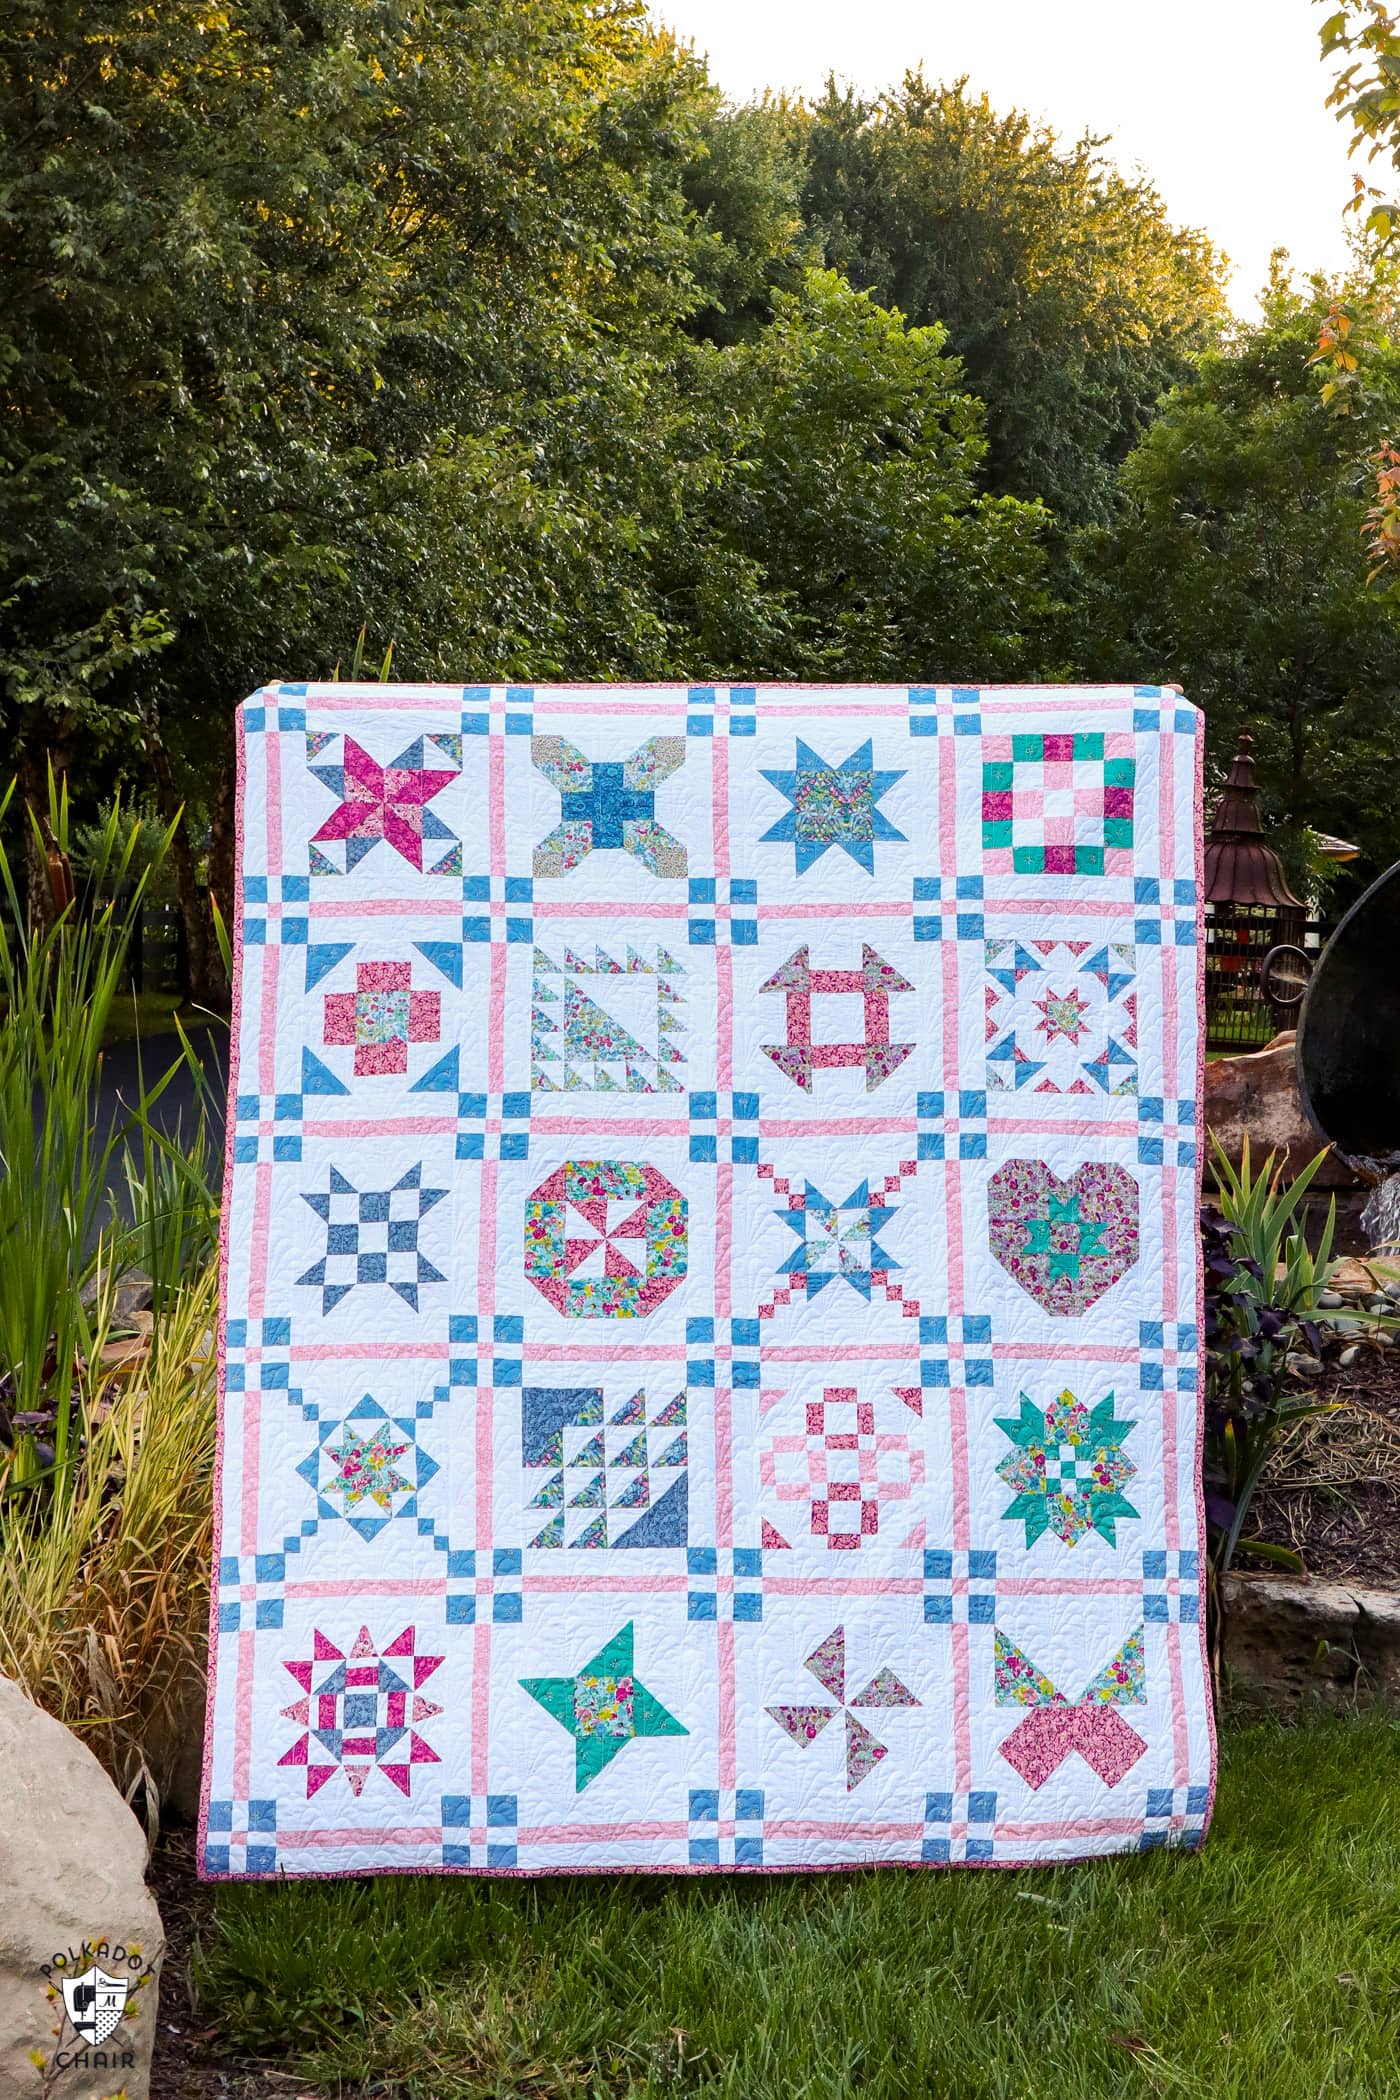 Blue, pink and white quilt photographed outdoors